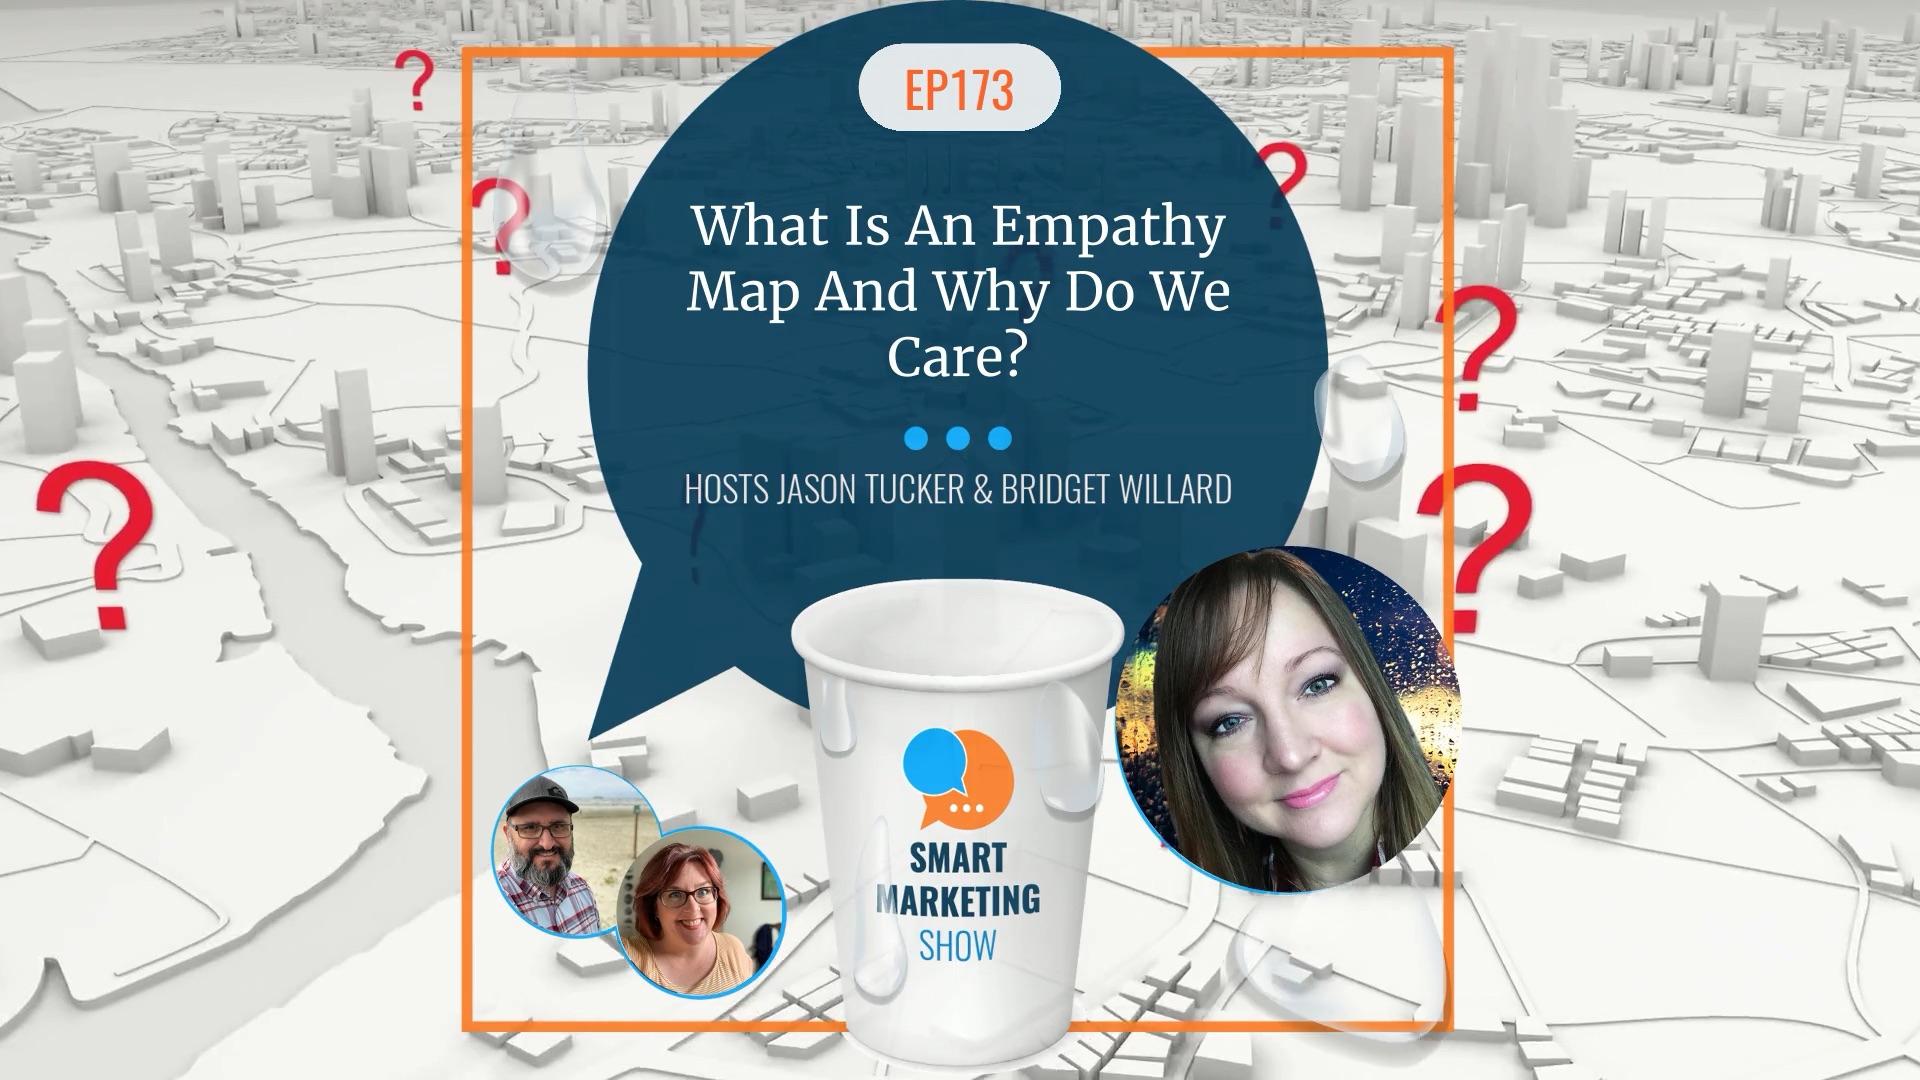 EP173 - What Is An Empathy Map And Why Do We Care